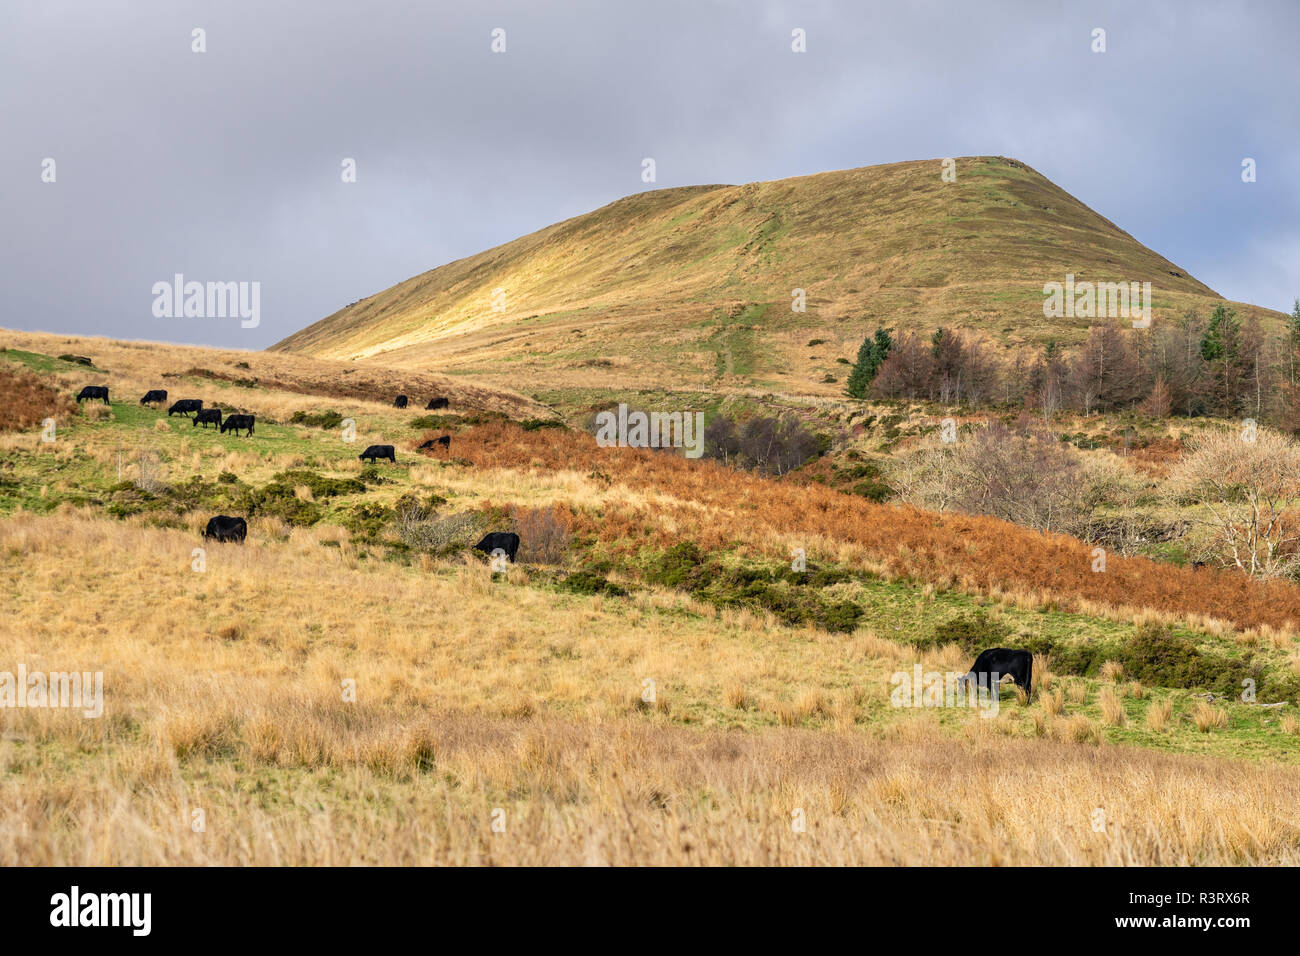 Cows grazing in the mountainous landscape around the Torpantau Ridge in the Brecon Beacons National Park during autumn, Powys, Wales, UK Stock Photo